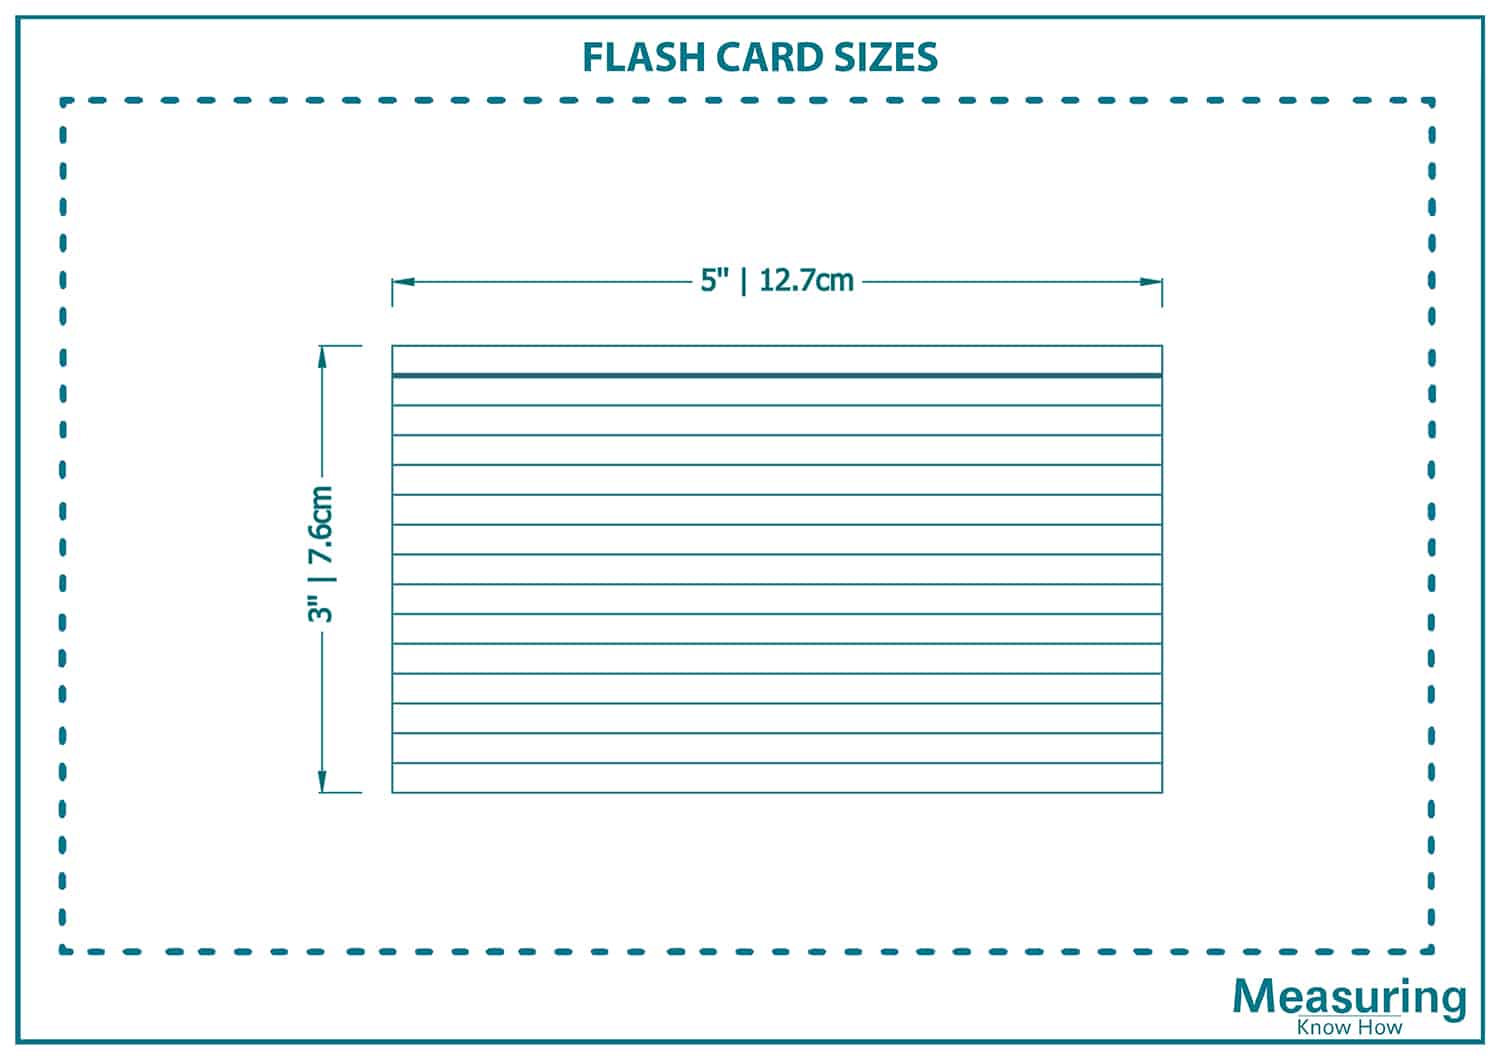 Typical Flash card size